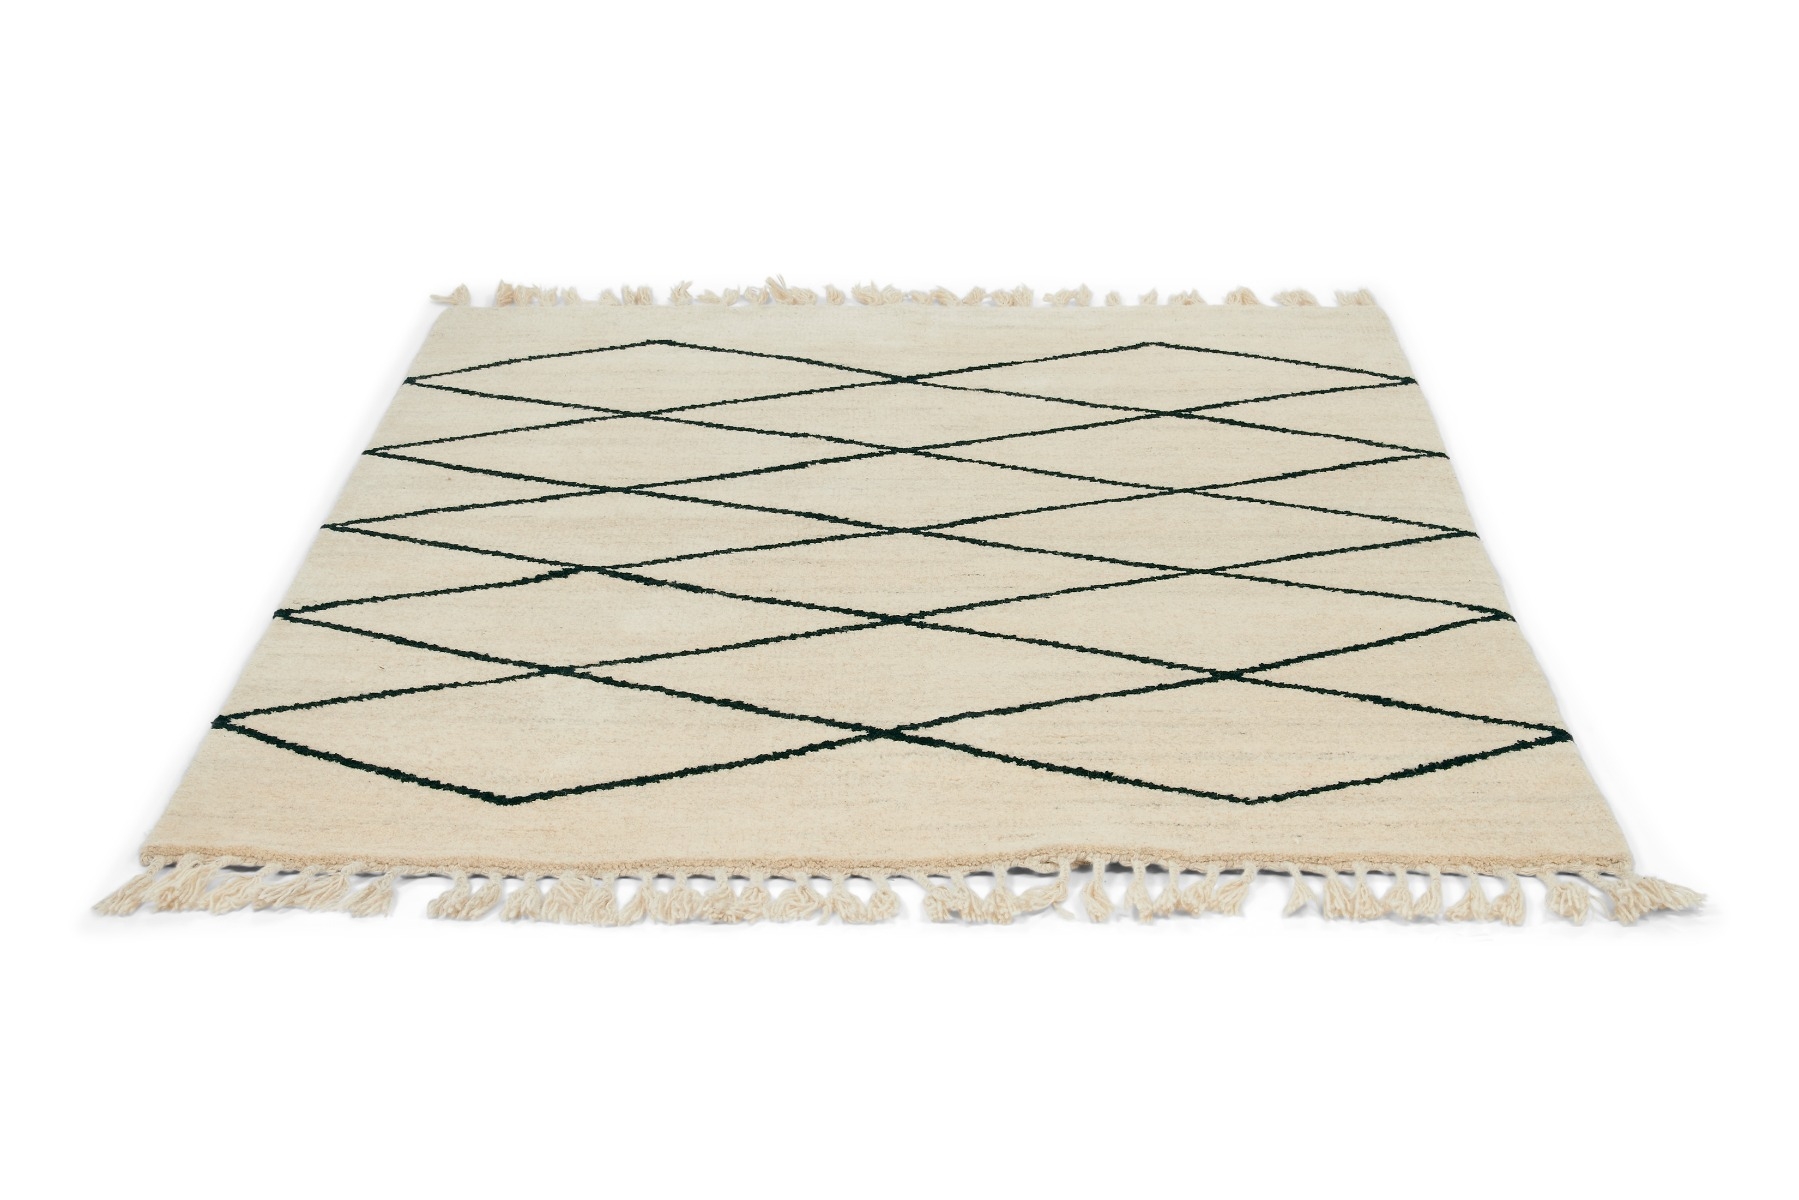 Moroccan Handknotted Rug ☞ Size: 140 x 200 cm